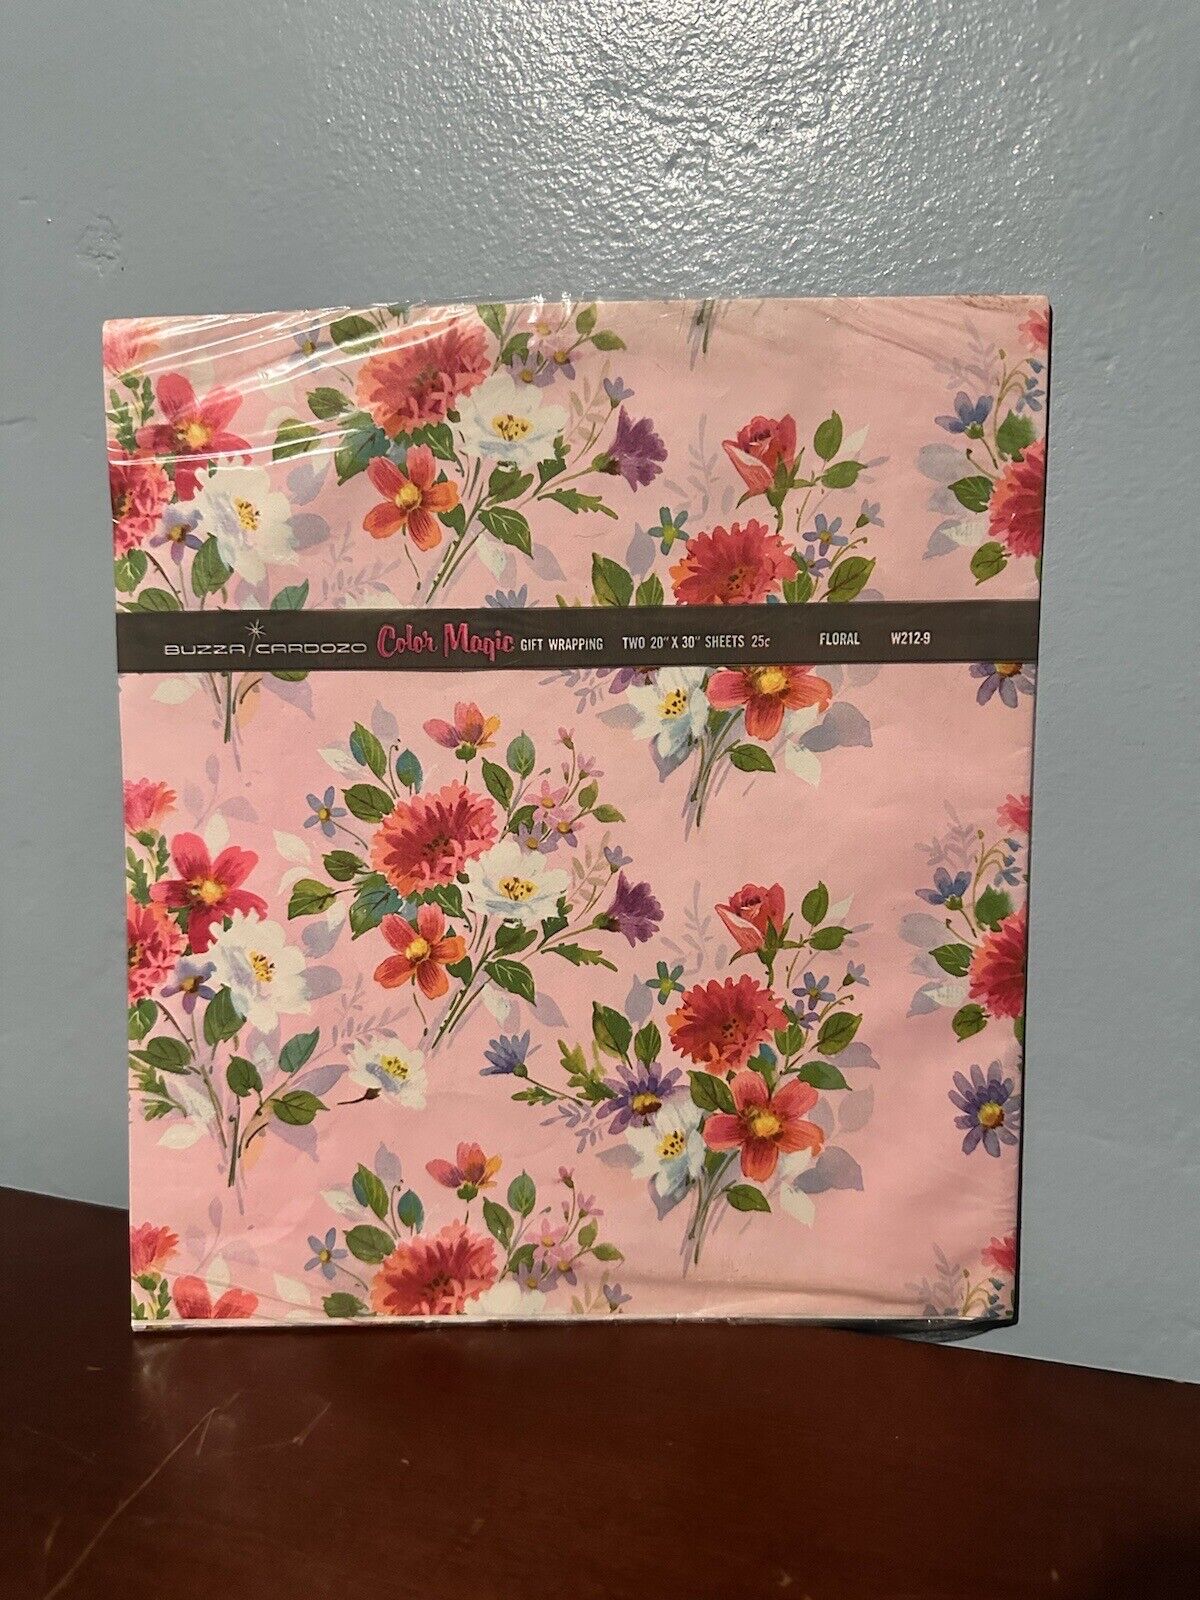 Vintage Buzza Cardozo Color Magic Floral Gift Wrapping Paper Pink Flowers NOS 